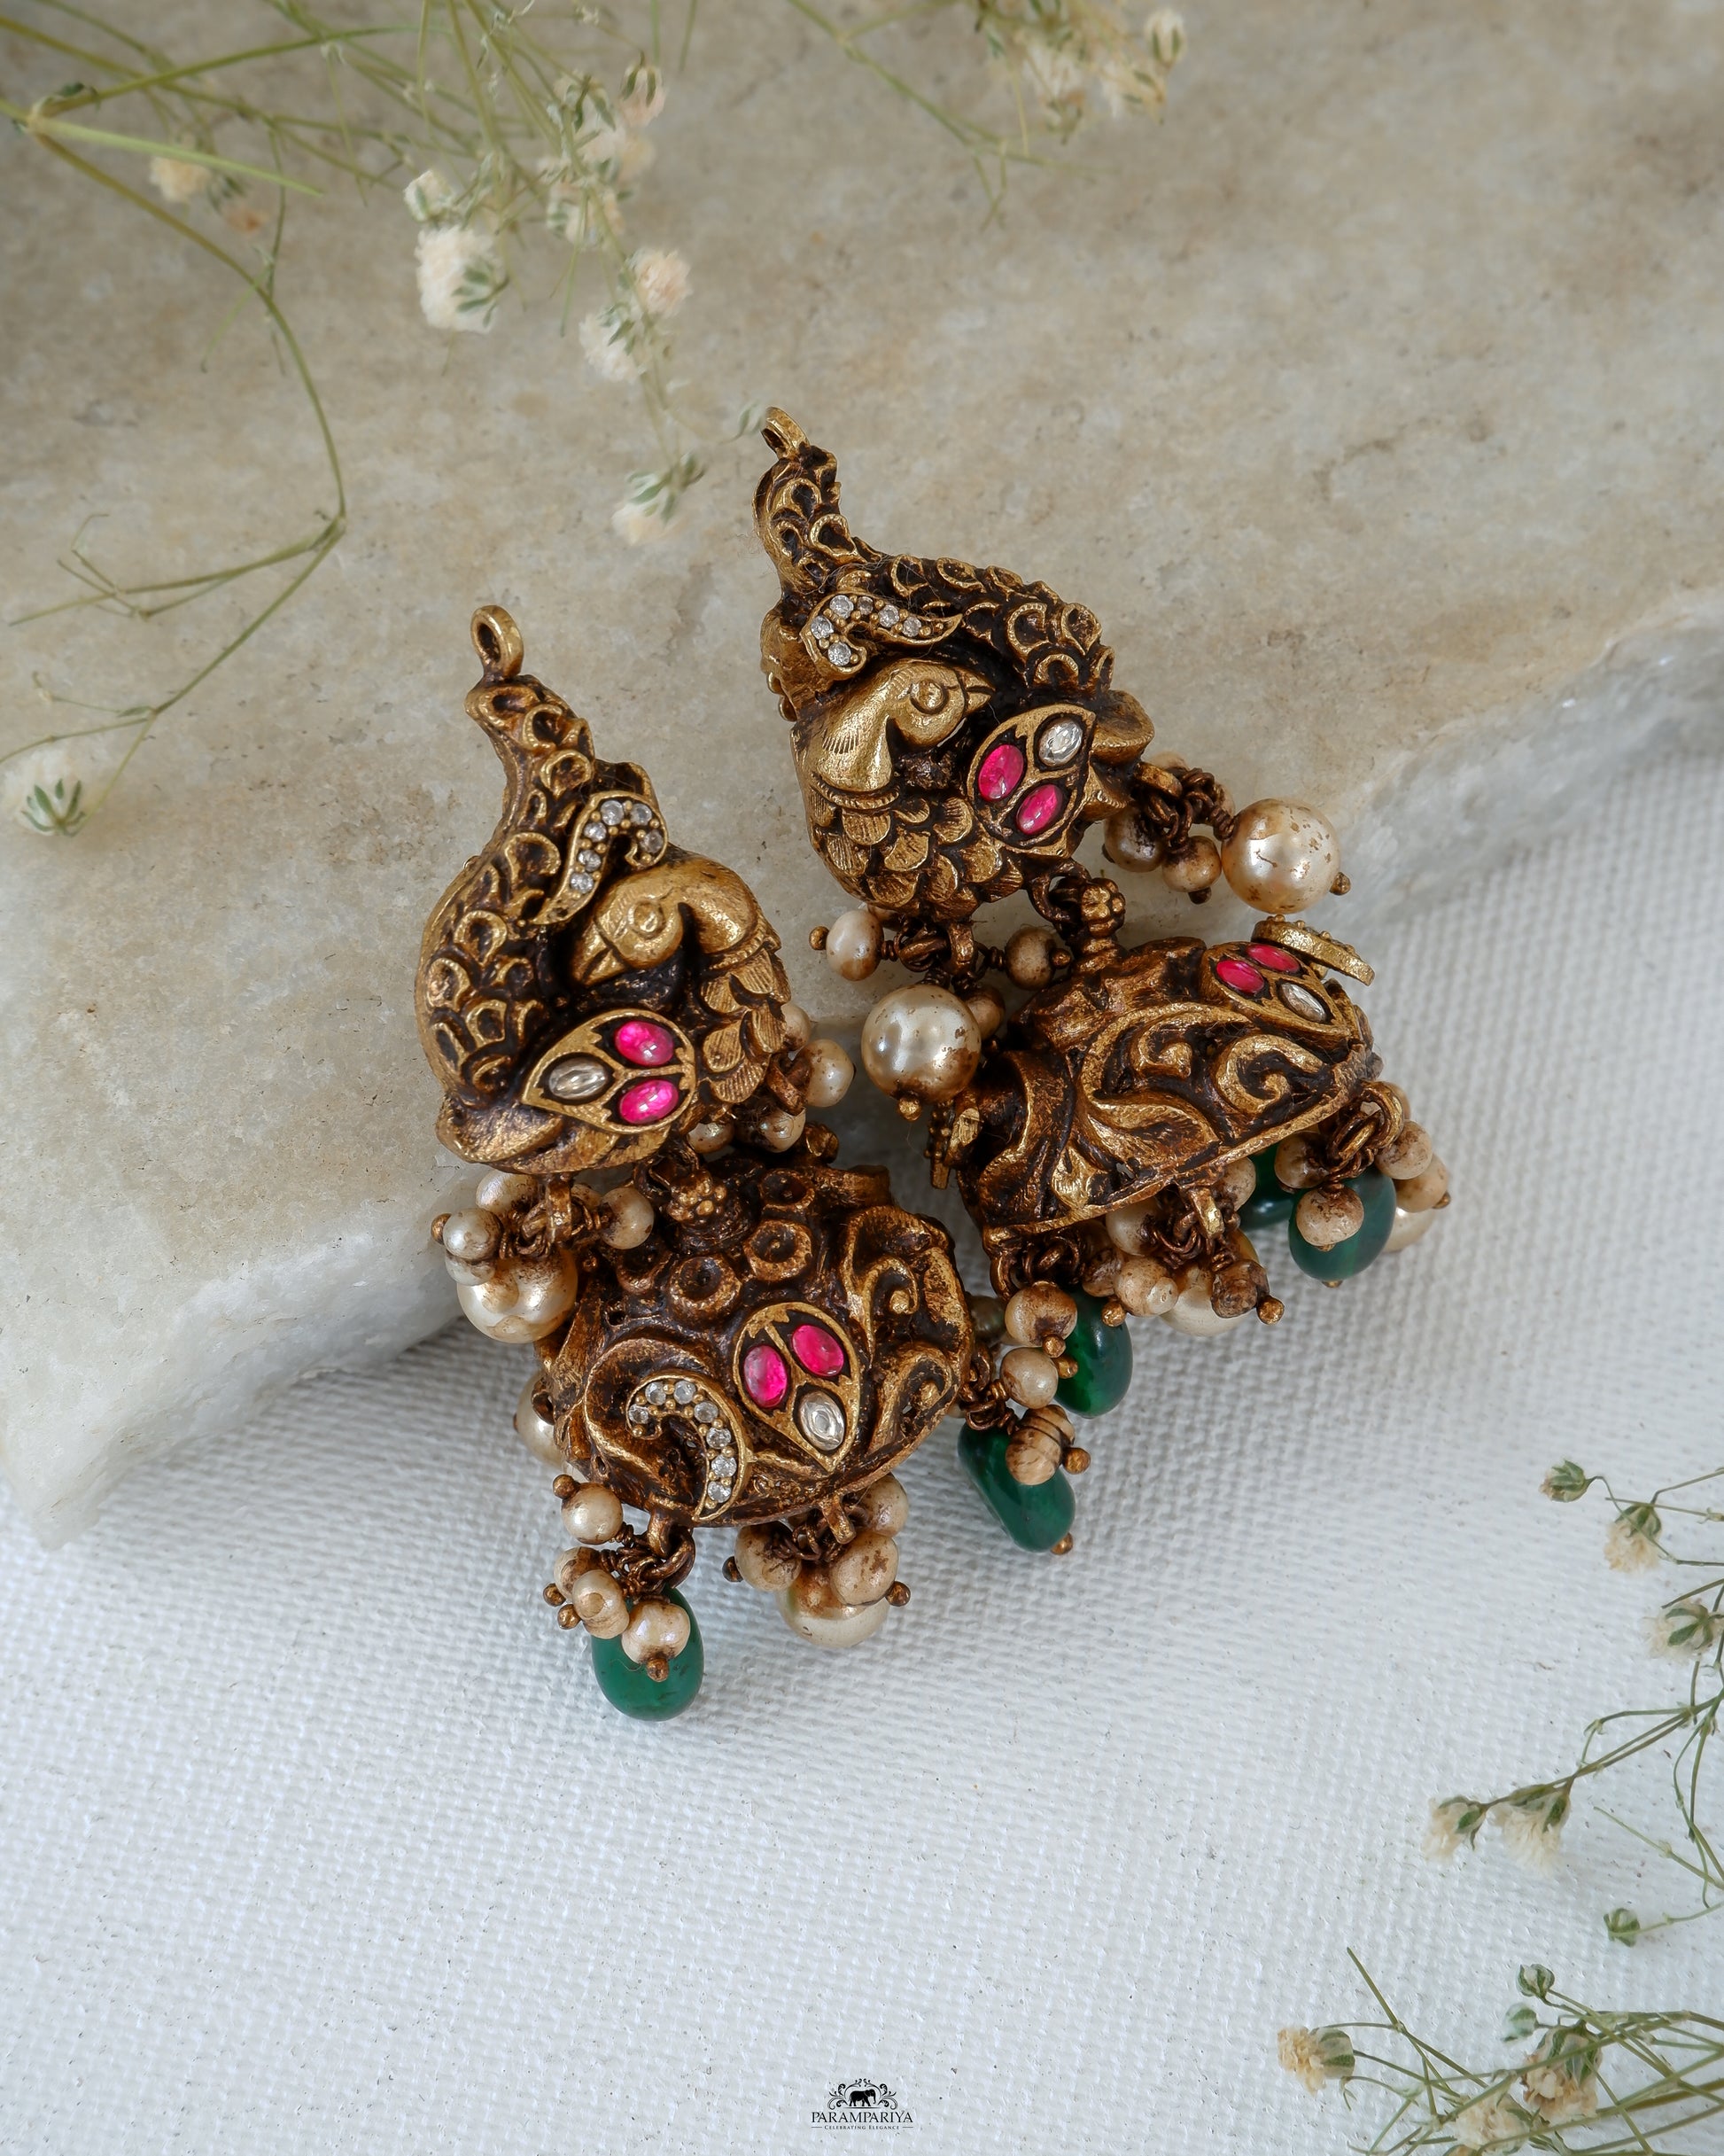 Mini jhumkas for an adorable look!!
Pure silver gold micron plated nakshi jhumkas with kundan and zircon stones.